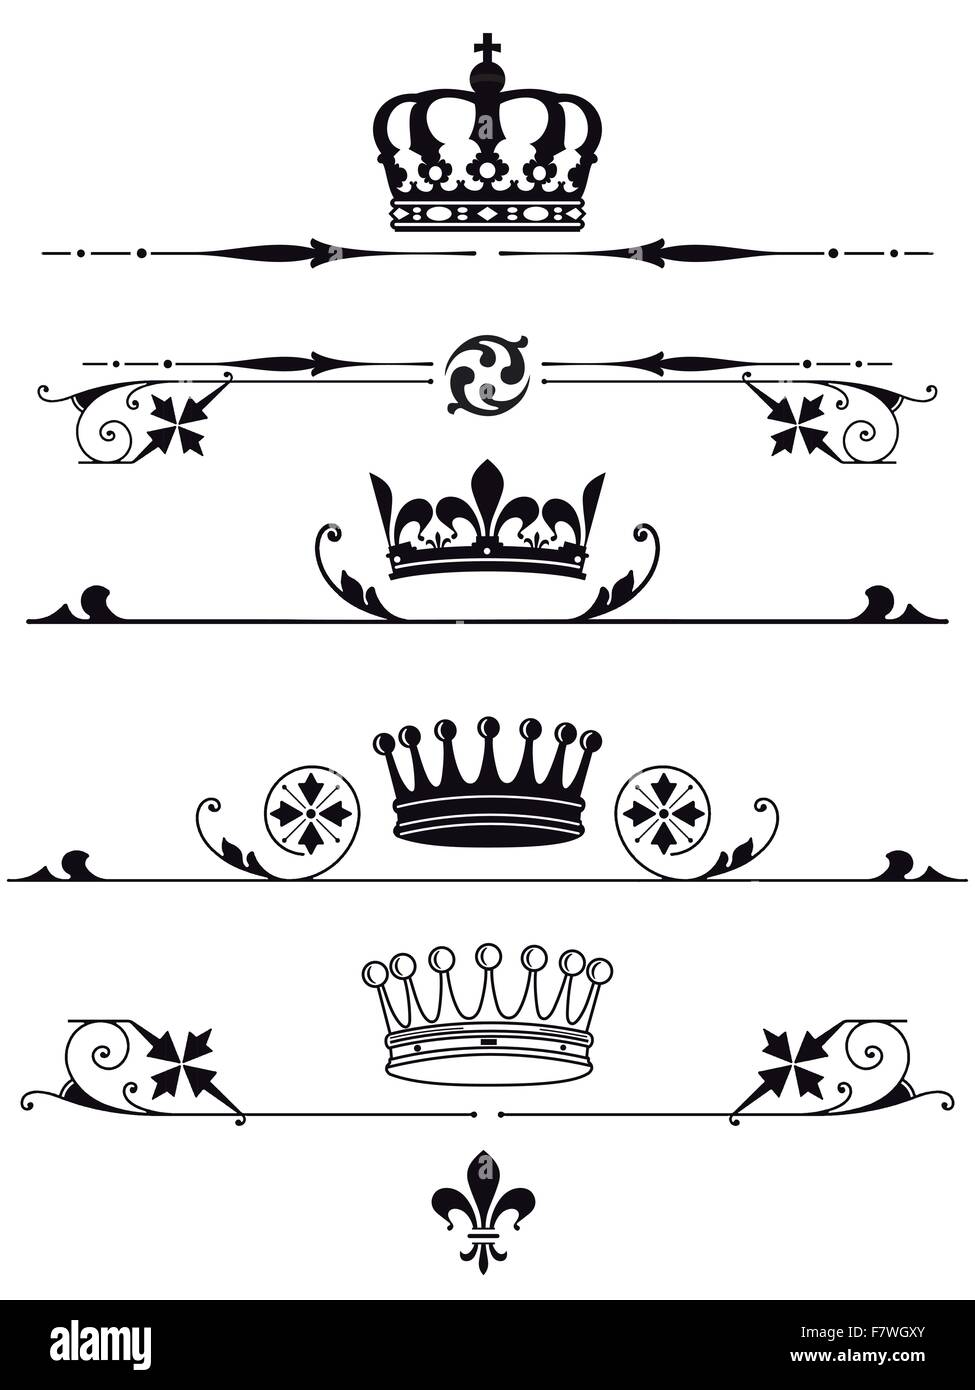 royal crowns and characters Stock Vector